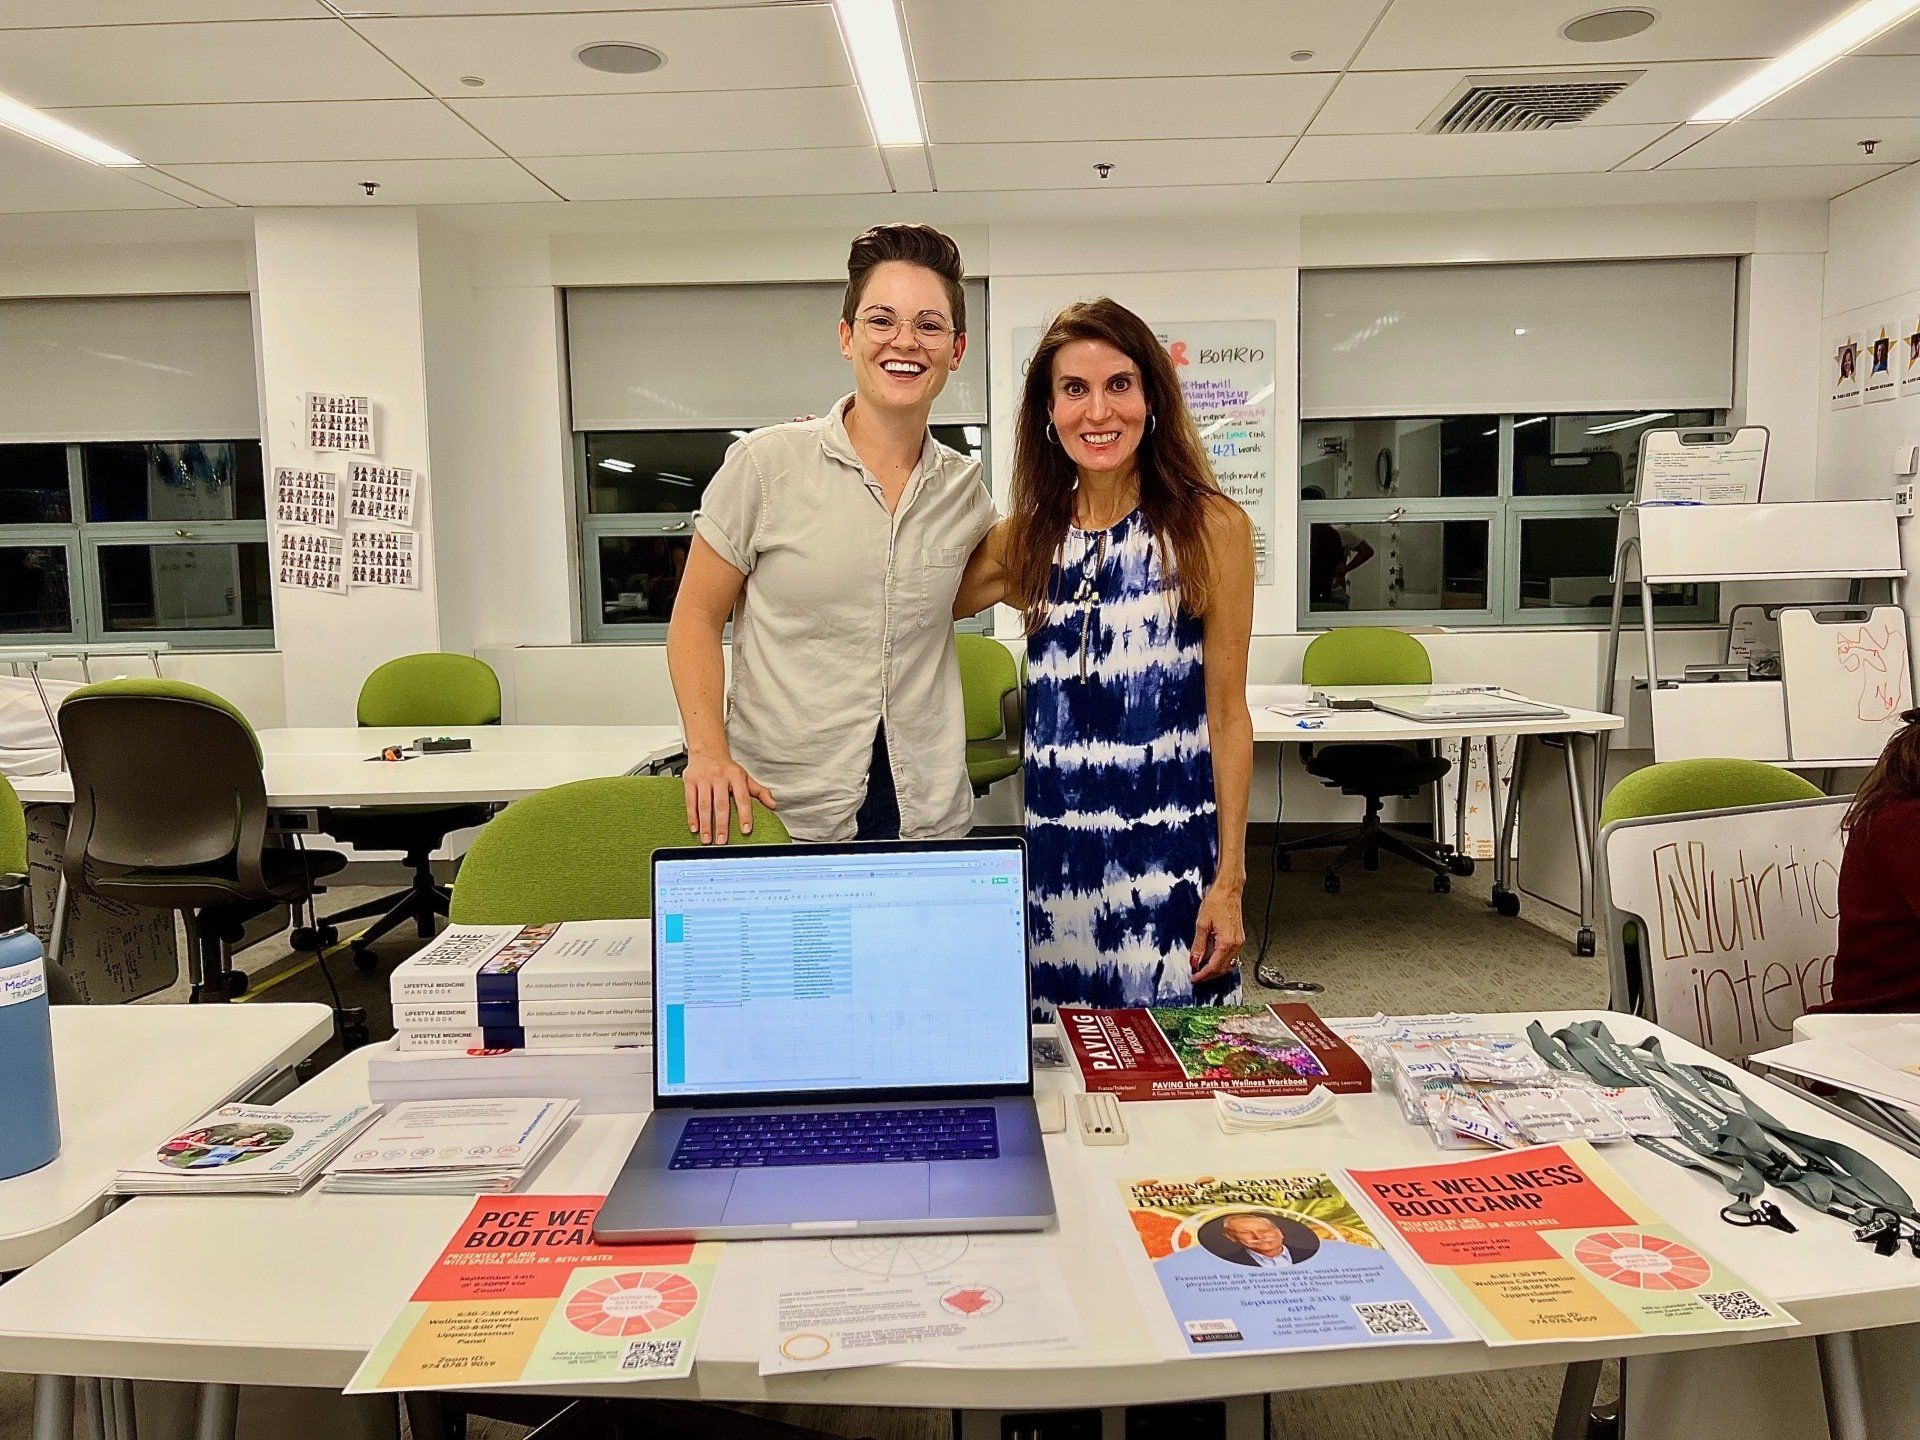 Dr. Frates and the 2022-2023 Lifestyle Medicine Interest Group (LMIG) President, Alexis Smith, Harvard Medical Student in her 4th year, at the Harvard Medical School Student Fair where a record number of students signed up the the LMIG--almost half the class!